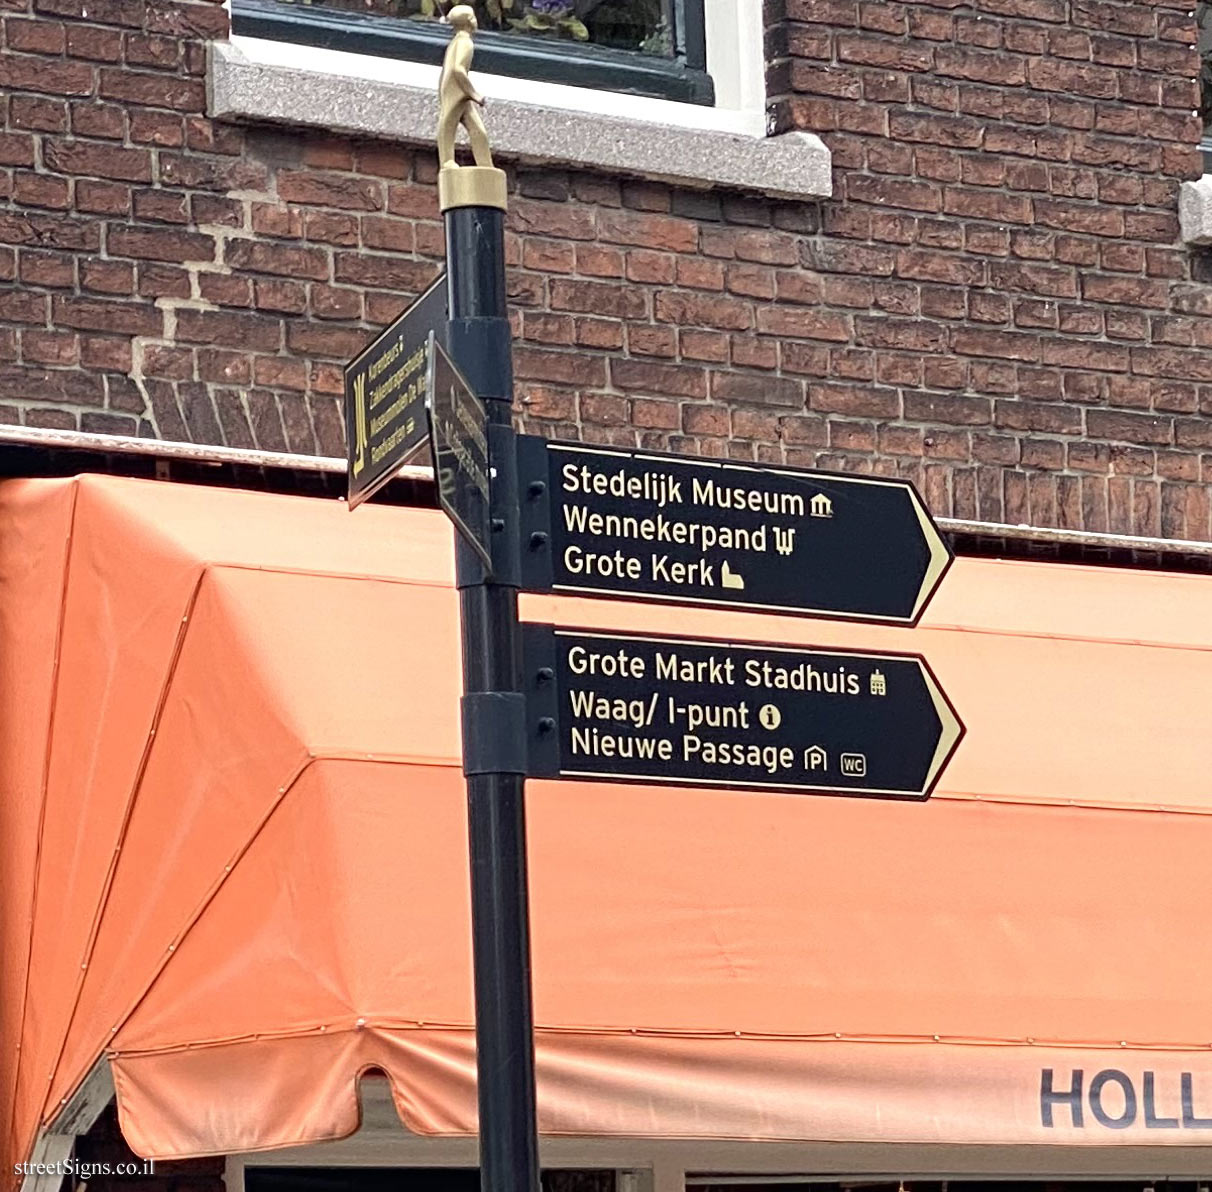 Schiedam - Directional signs for sites in the city